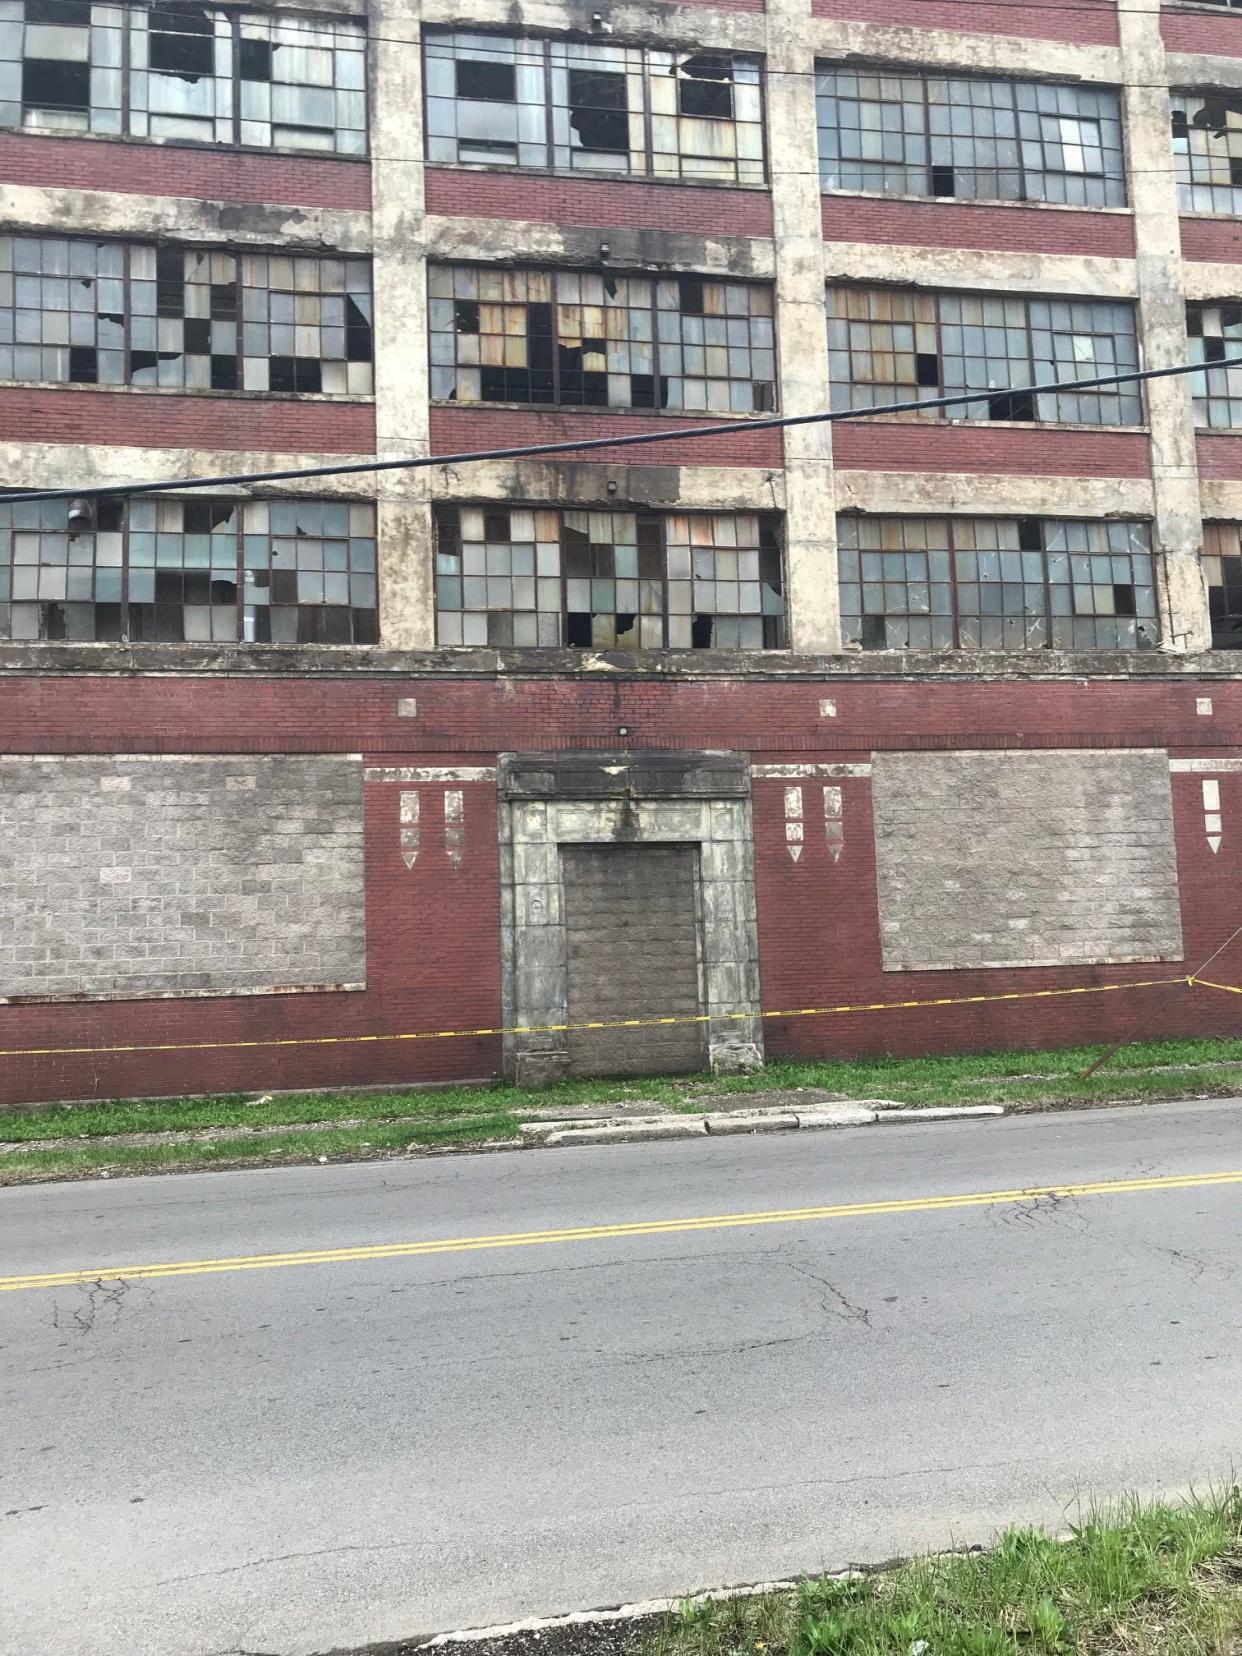 This is the doorframe of the former Westinghouse "A" building that historic preservation groups want to save as a monument to Westinghouse, manufacturing history, and women in the workforce. The building at 200 E. Fifth St. is slated to be demolished.